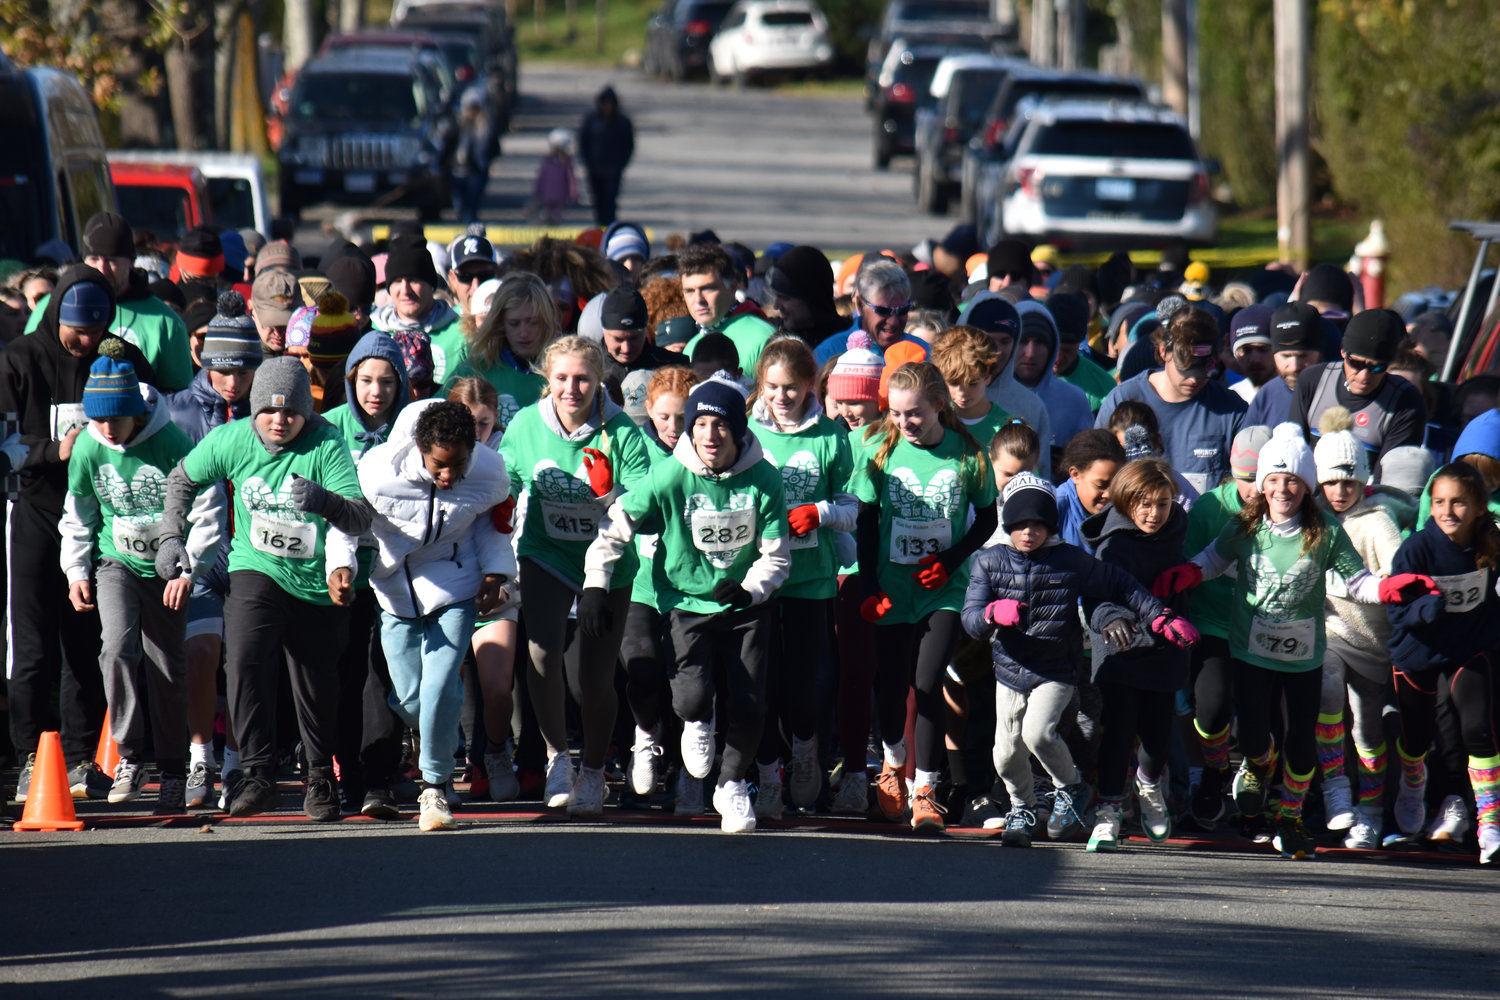 Kids line up at the starting line on Sunday for the Run for Robin in Sconset to benefit the Harvey Foundation.